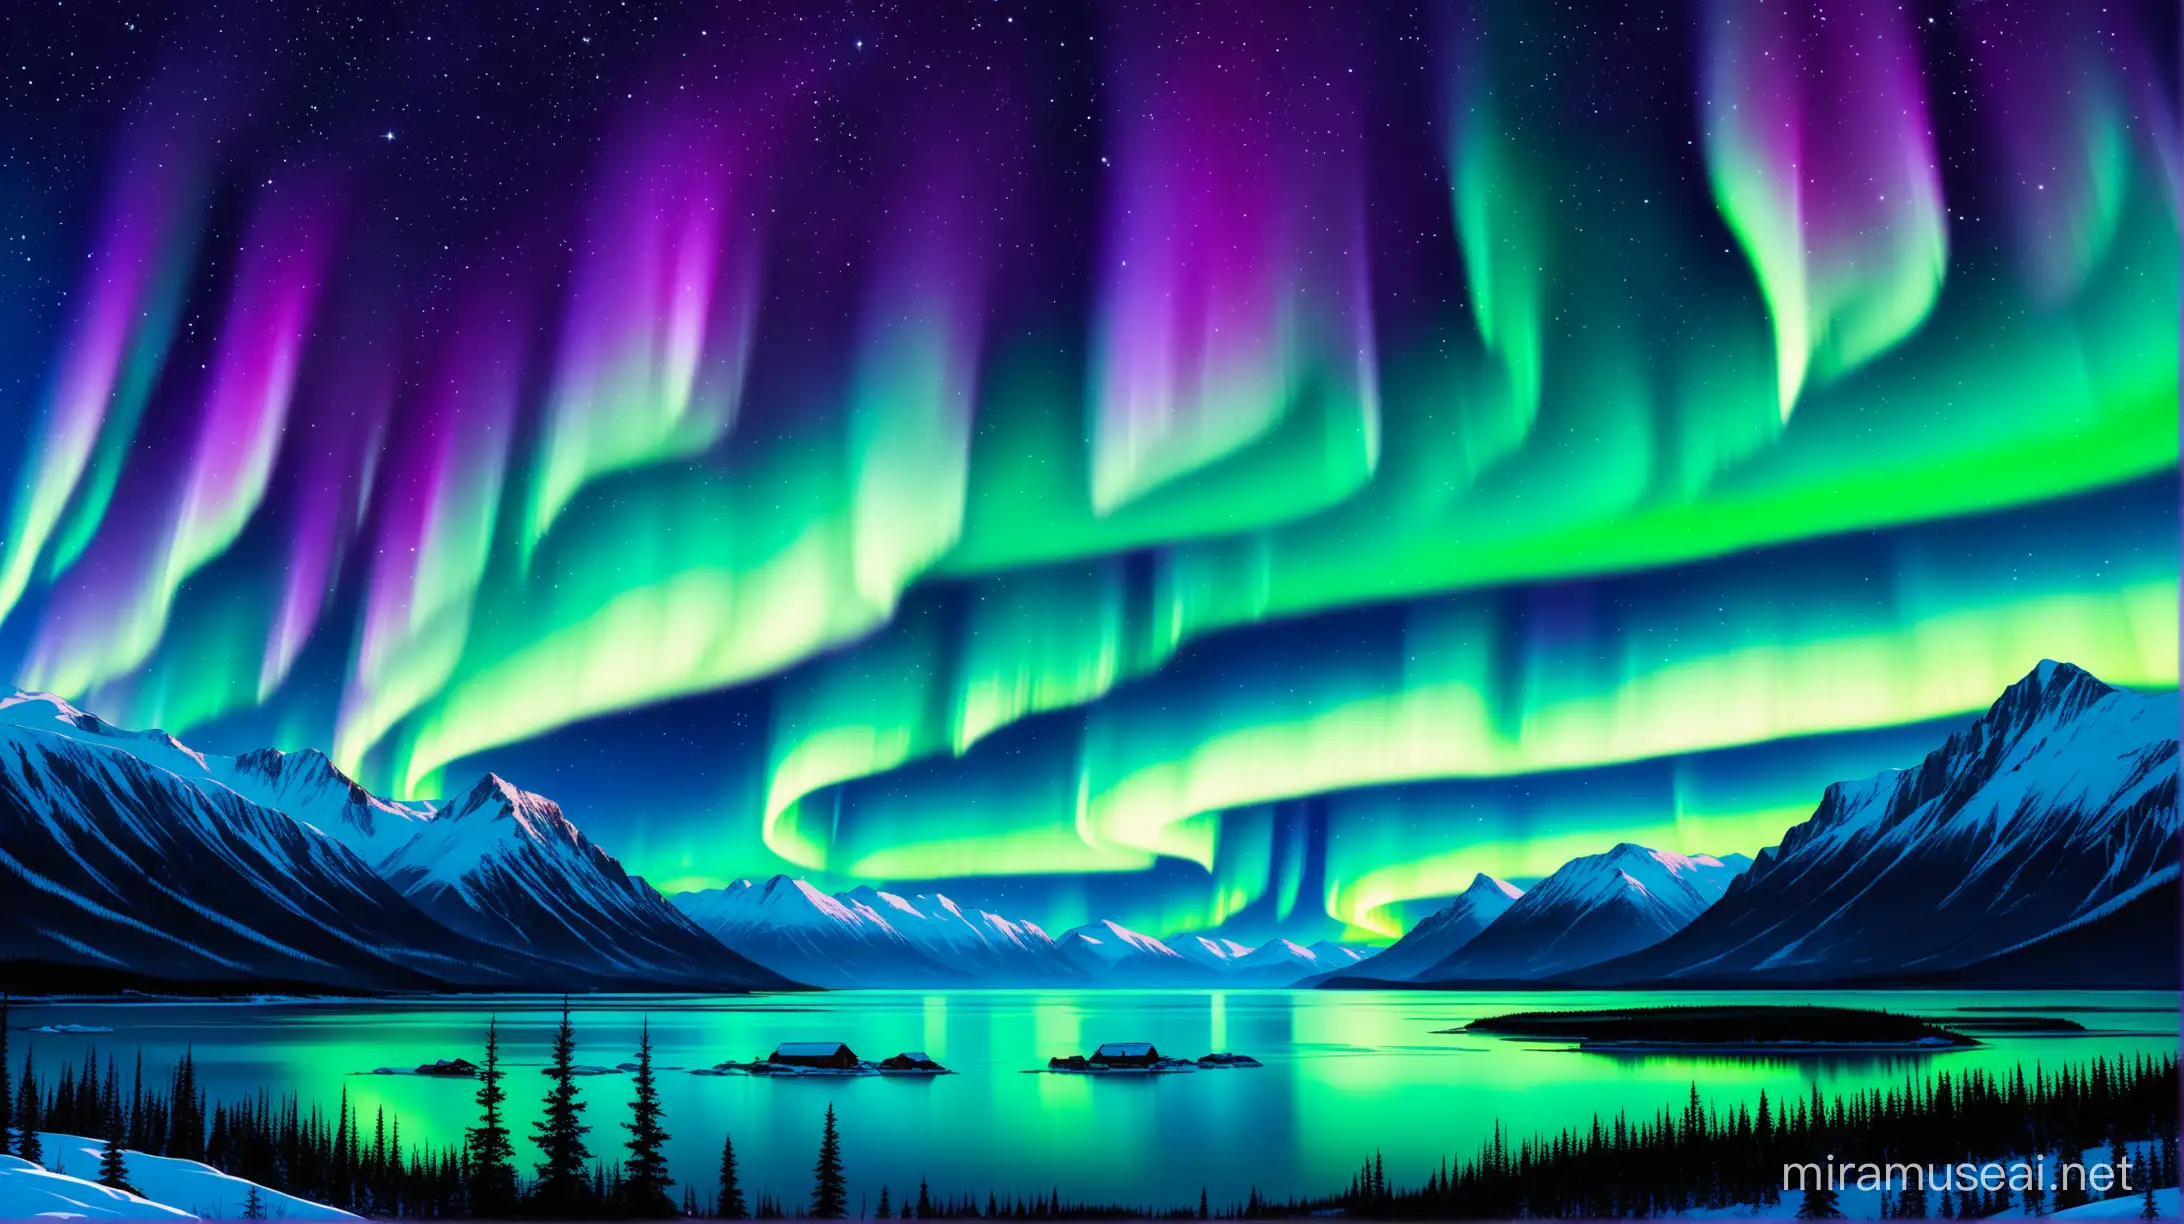 Northern lights, Teals, turquoises, violets, Stars, no mountains
